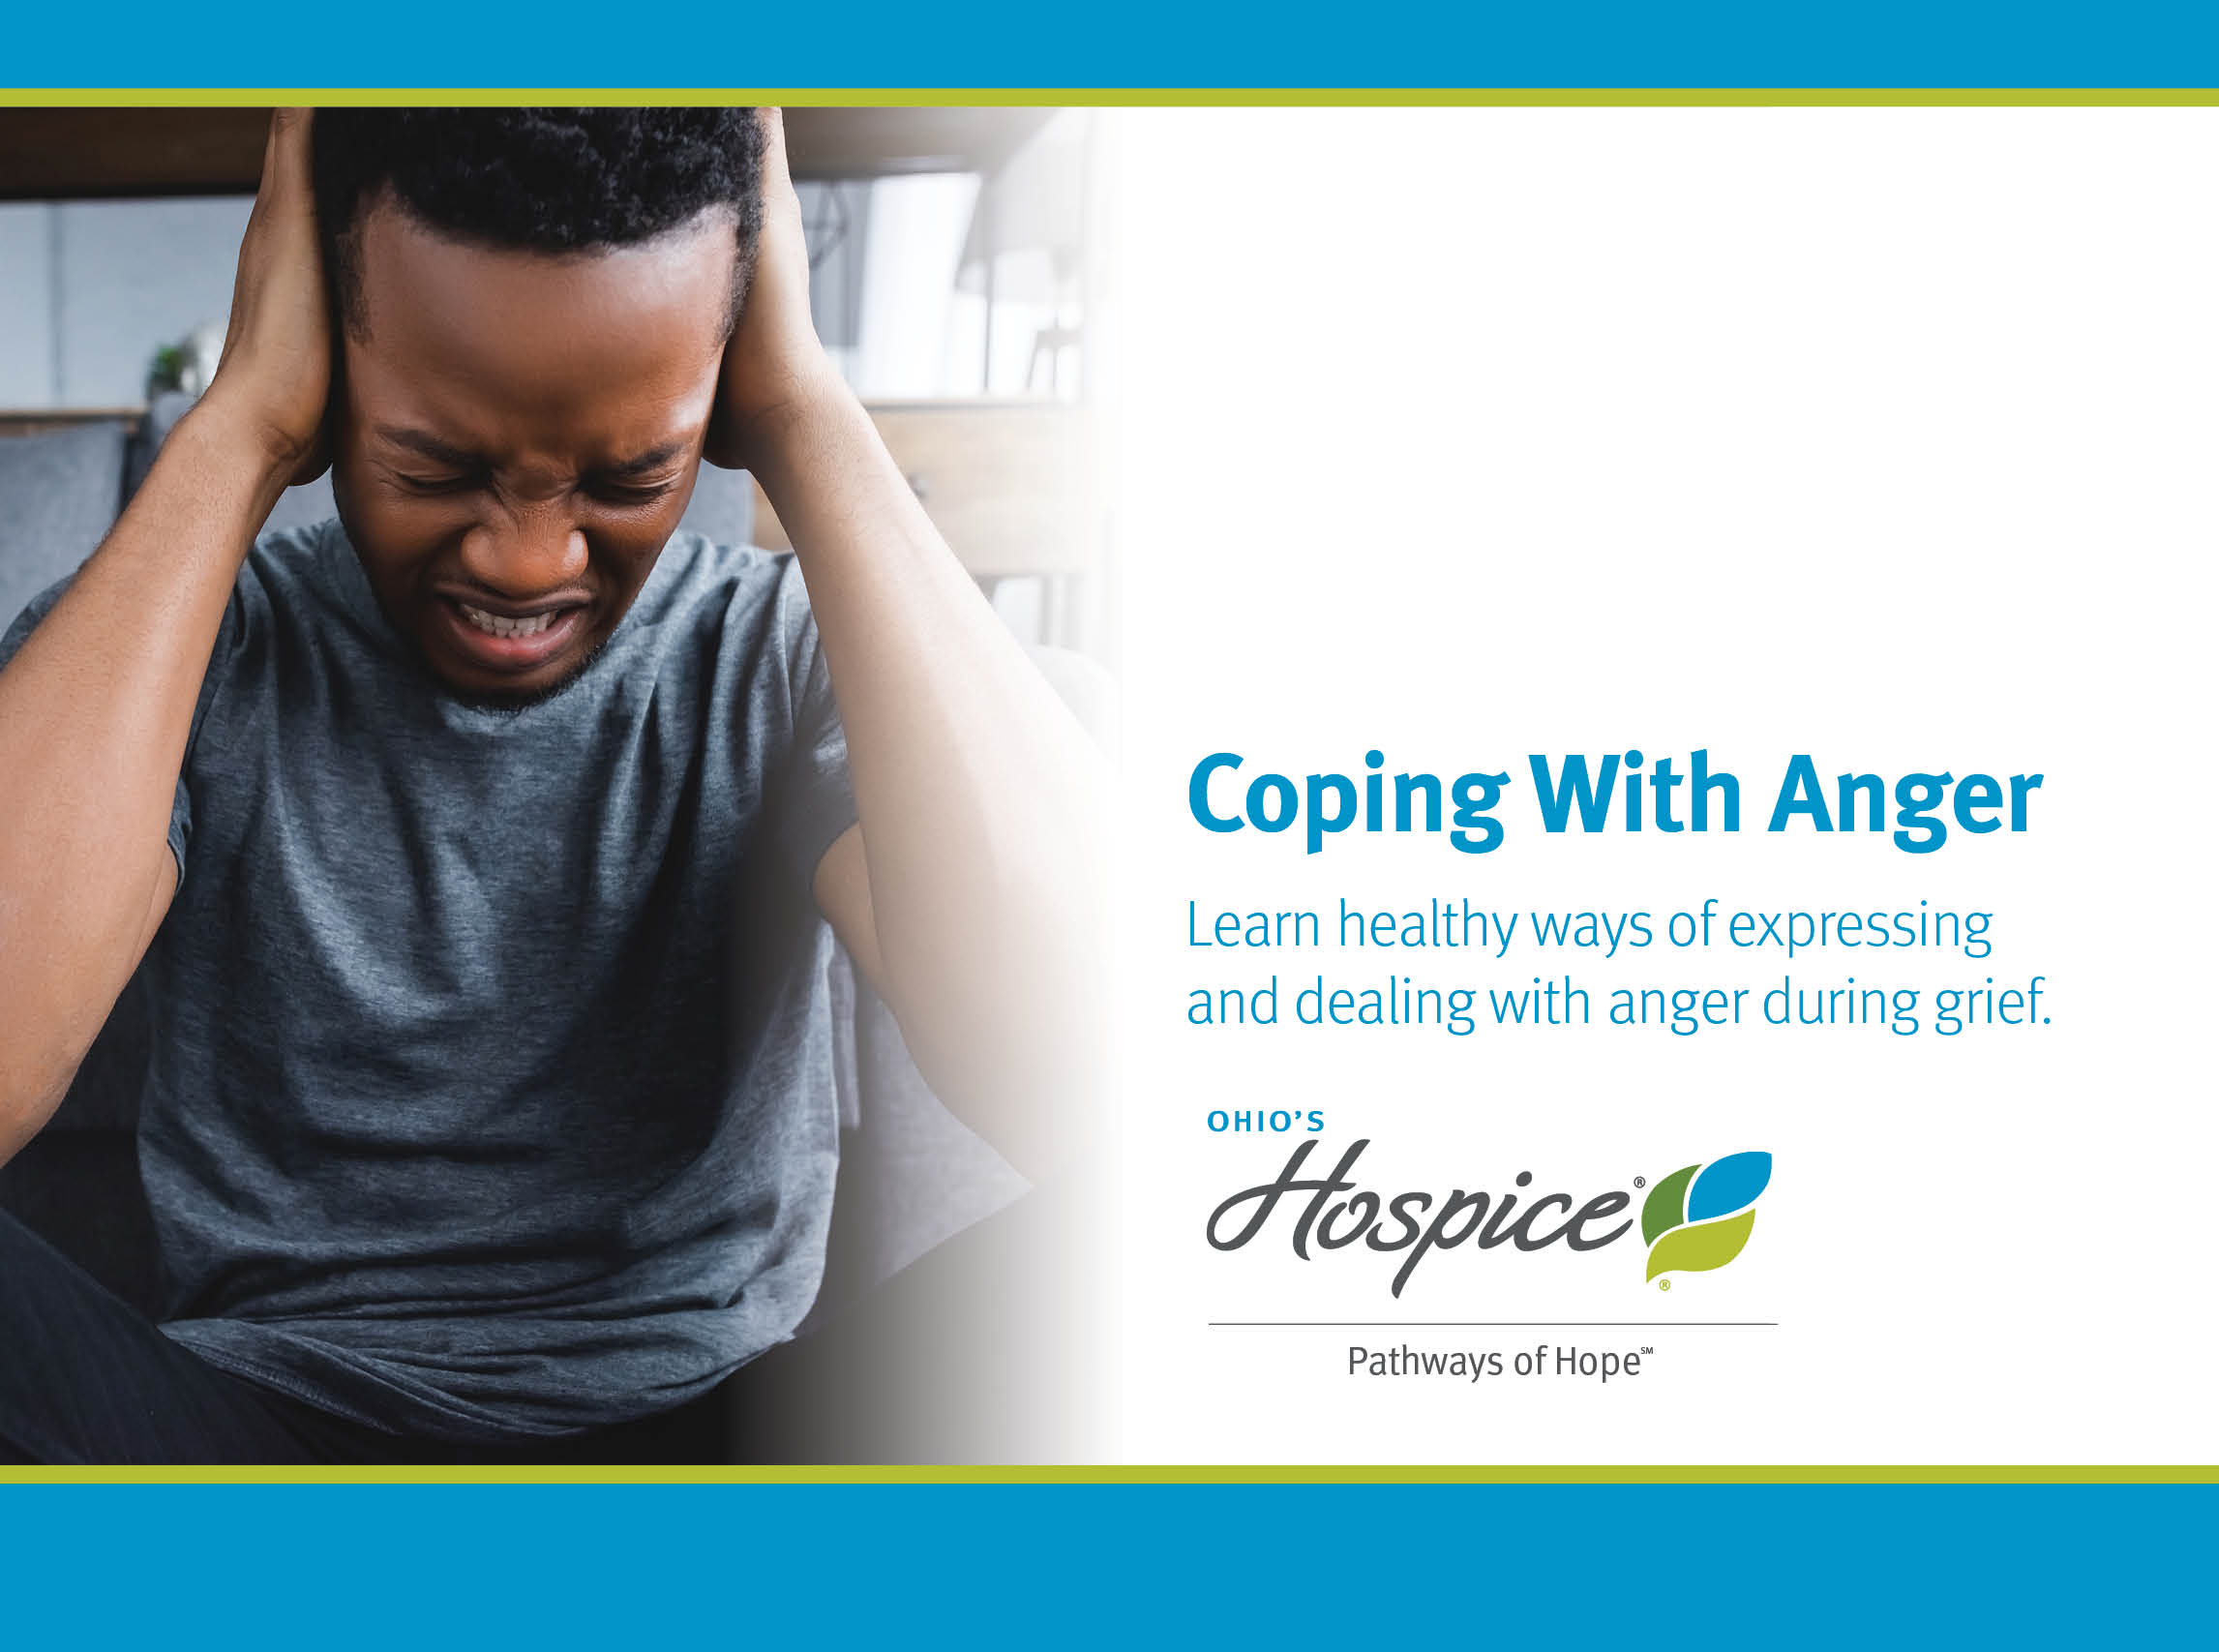 Coping With Anger. Ohio's Hospice Pathways of Hope.